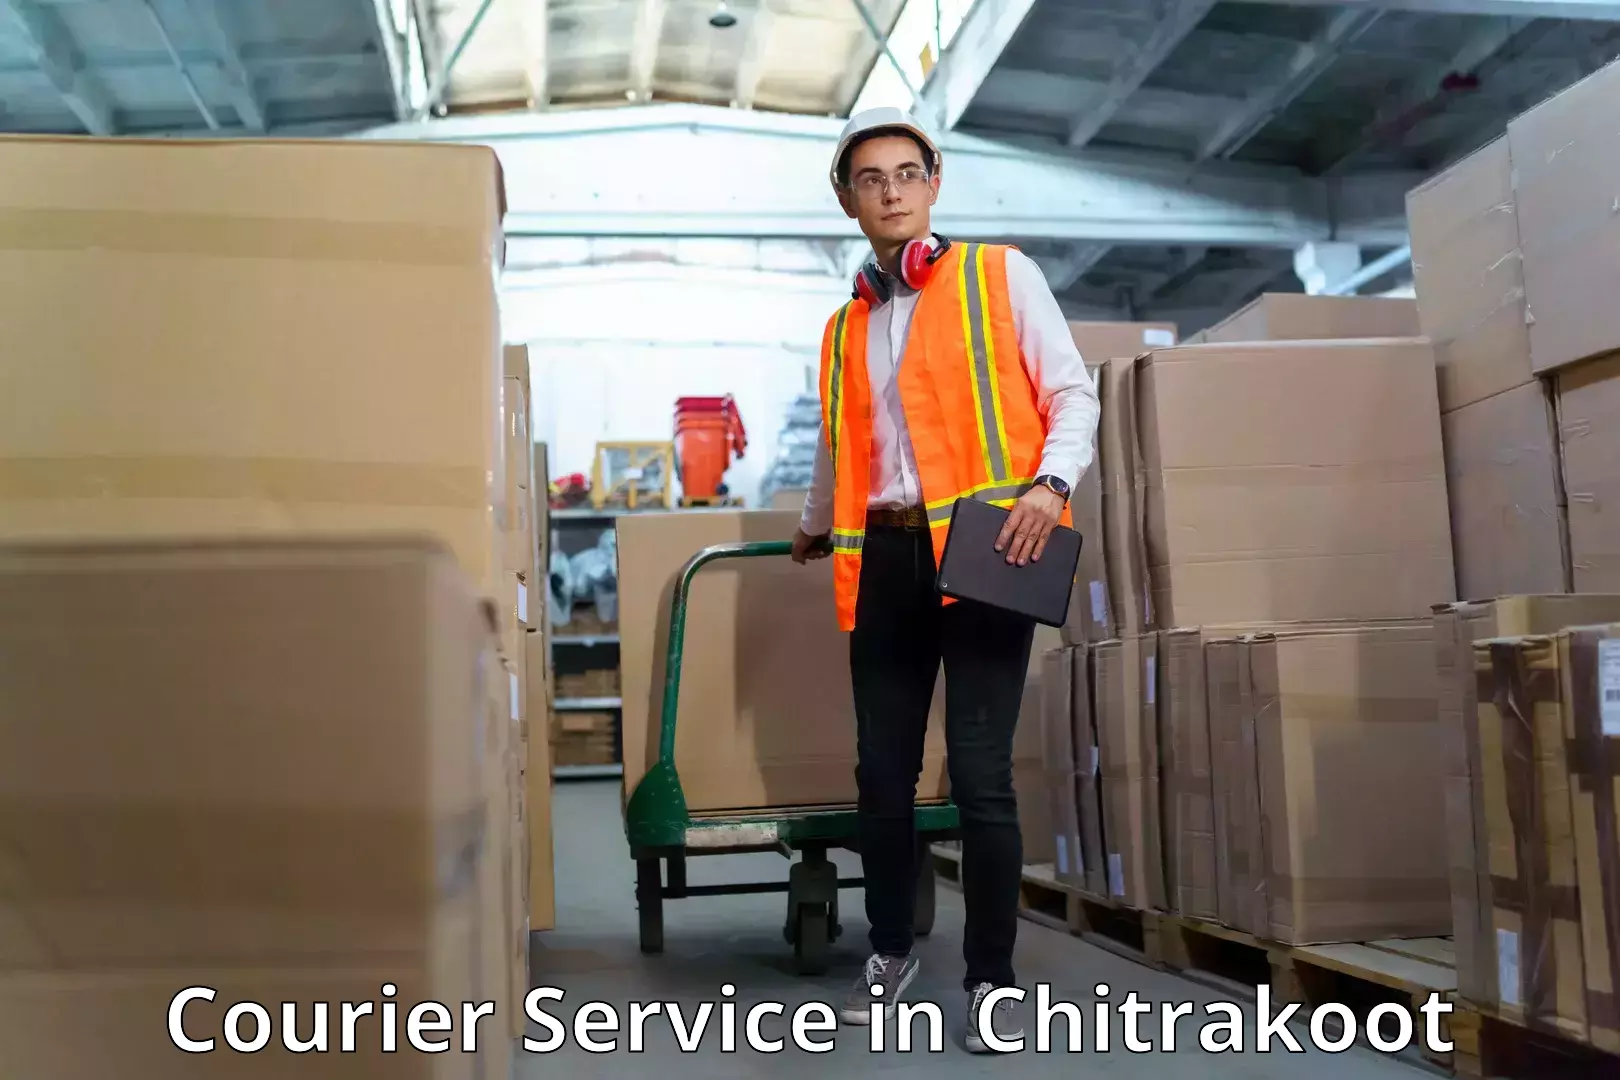 Efficient cargo services in Chitrakoot